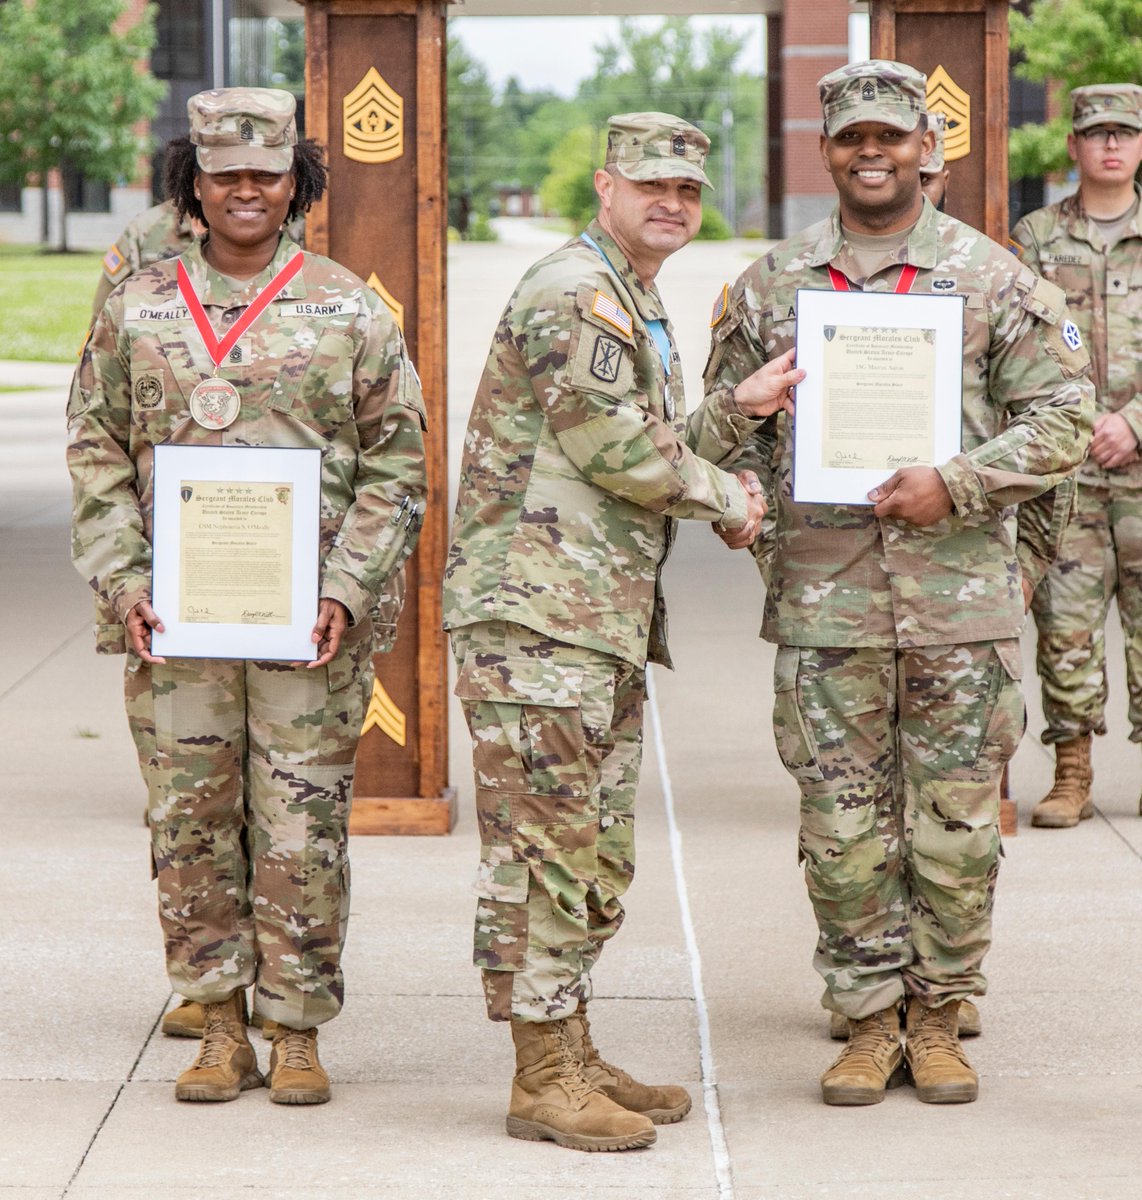 Today, Command Sgt. Maj. Nephoteria S. O'Meally, V Corps HHBN command sergeant major, and 1st Sgt. Marcus L. Aaron, SISCO first sergeant, were inducted into the Sergeant Morales Club. Great job, Command Sgt. Maj. O'Meally and 1st Sgt. Aaron, and congratulations!